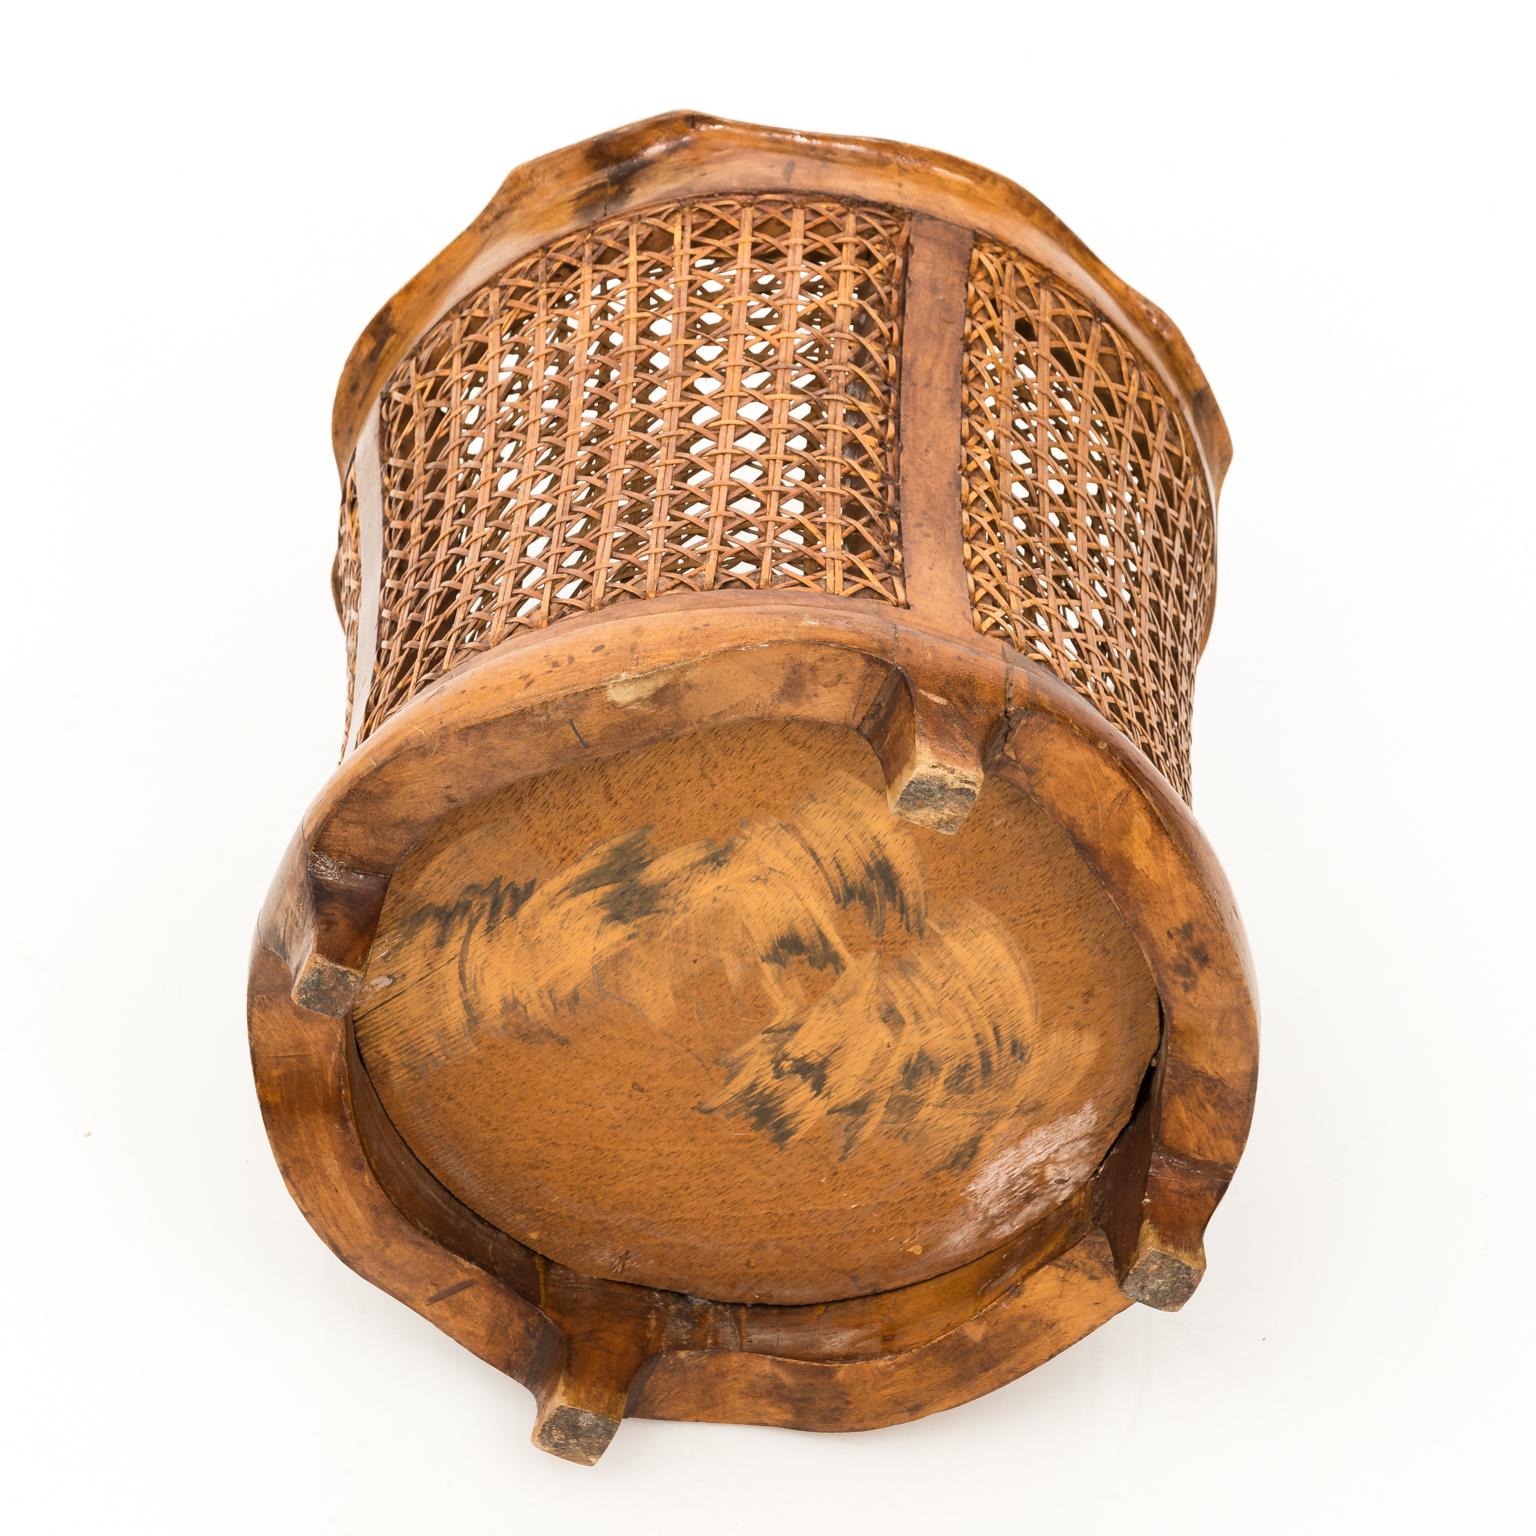 Regency style woven wicker dust bin with scalloped edging, circa late 20th century.